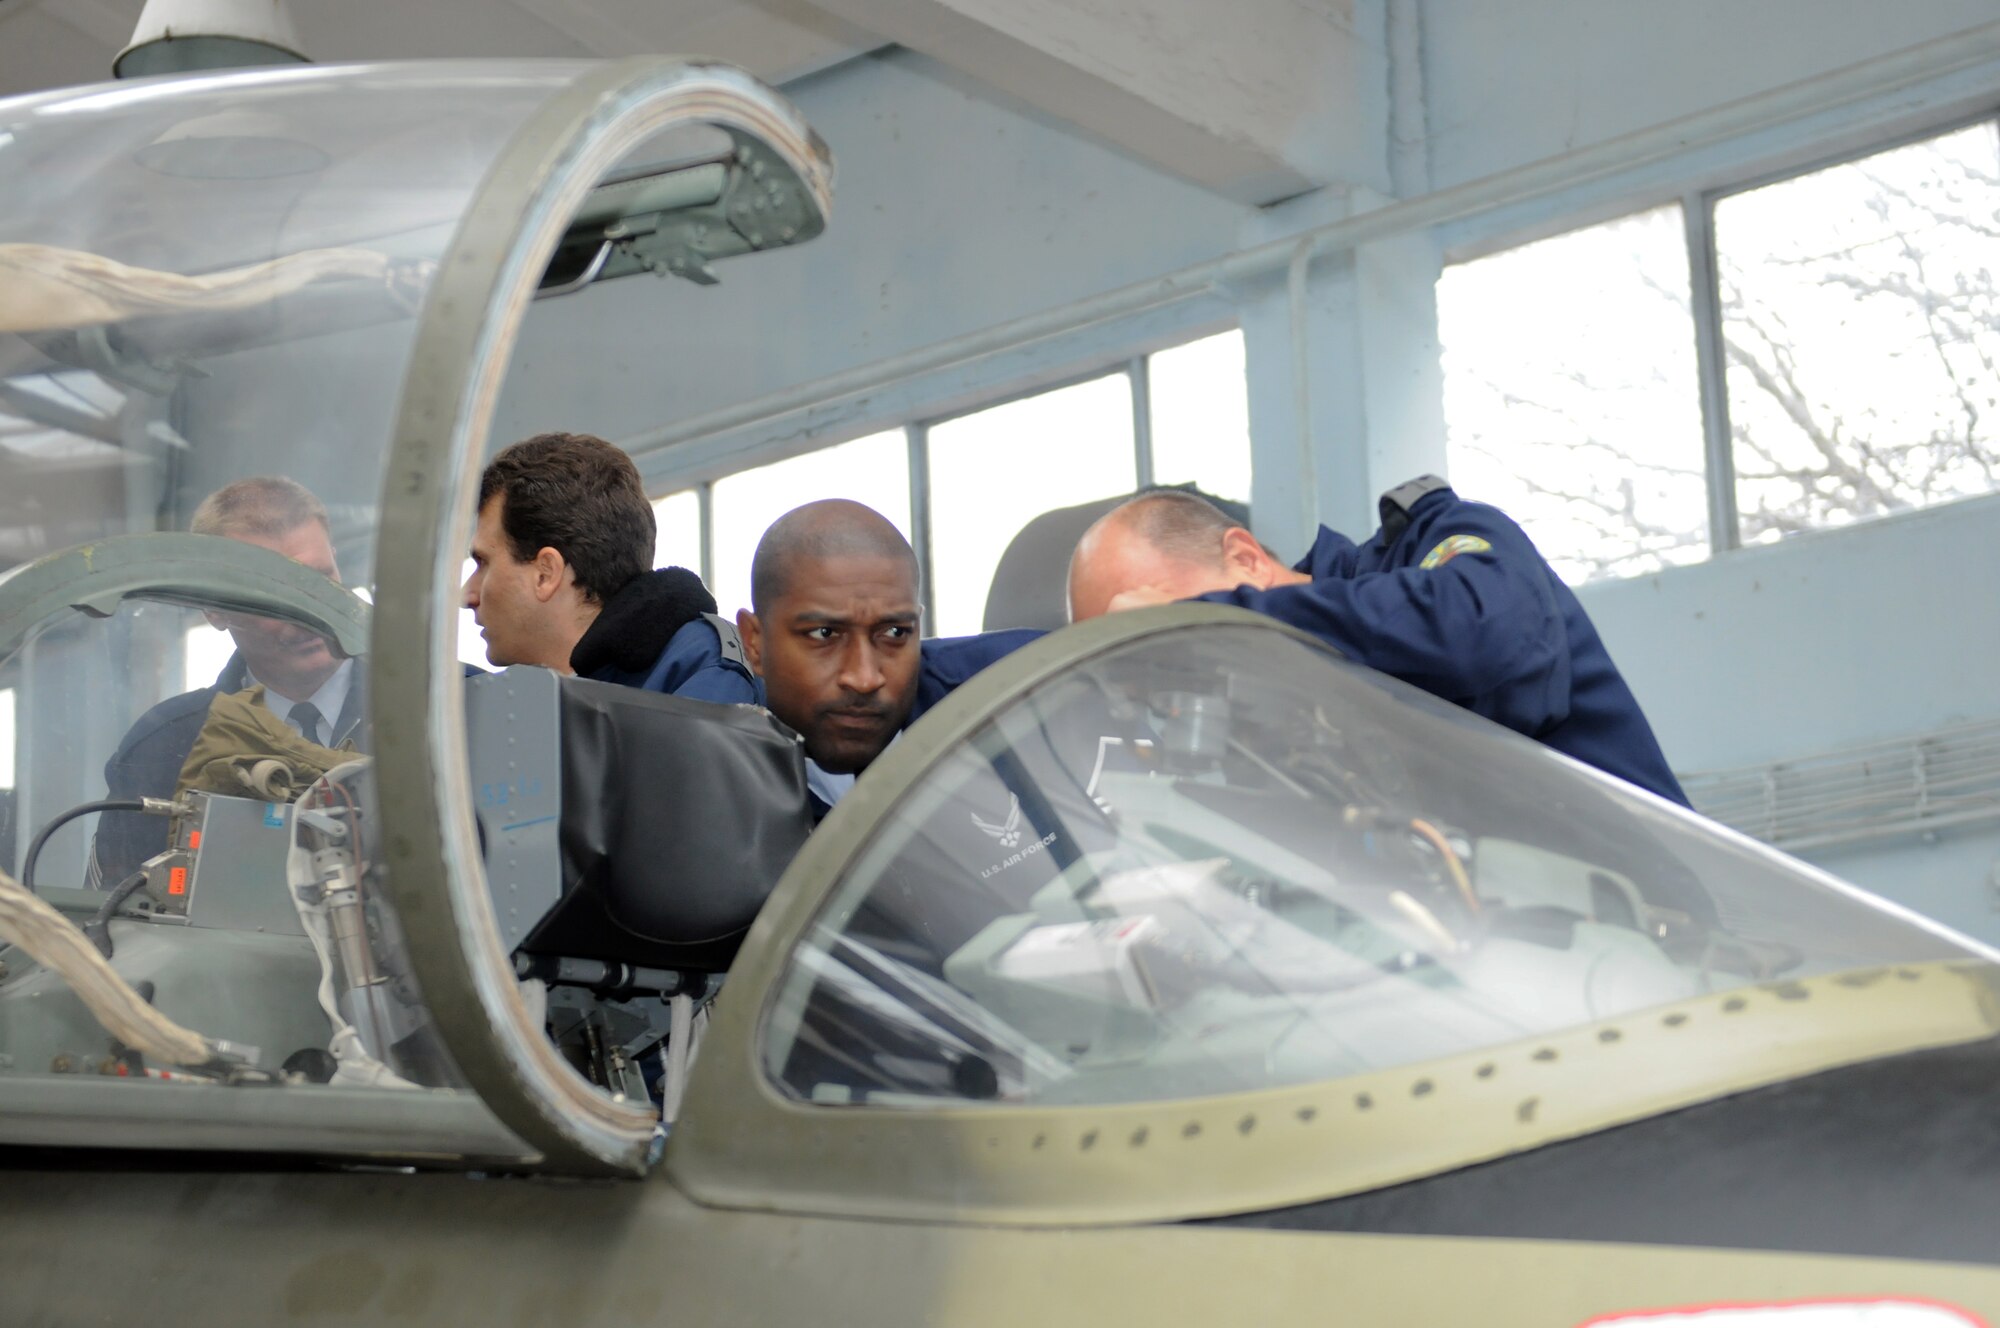 Master Sgt Timothy Barfield, learns about the capabilities of Bulgarian training aircraft during a visit to Dolna Mitropolya Air Force Training Base, in Bulgaria Nov. 6, 2009. Sergeant Barfield is the USAFE command chief executive assistant. (U.S. Air Force photo/Master Sgt. Gino Mattorano)